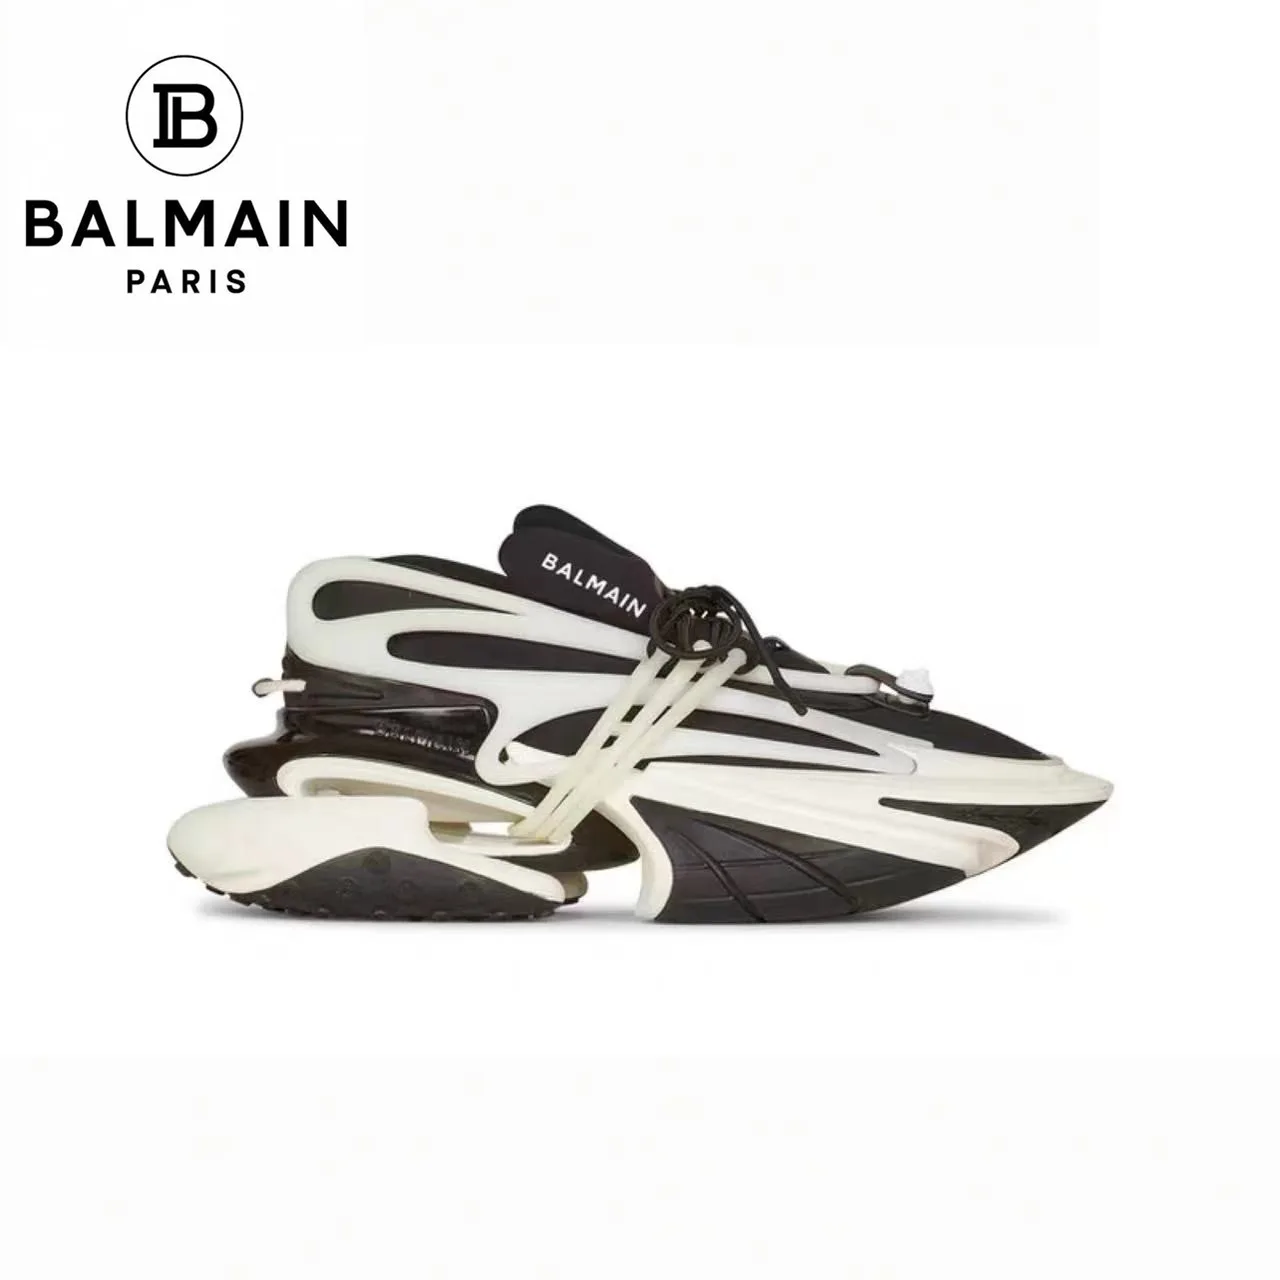 

Balmain Casual Designer Running Shoes Women Gym Luxury High Top Sneakers Tennis Shoes Men Trainer Race Breathable Tides Shoes